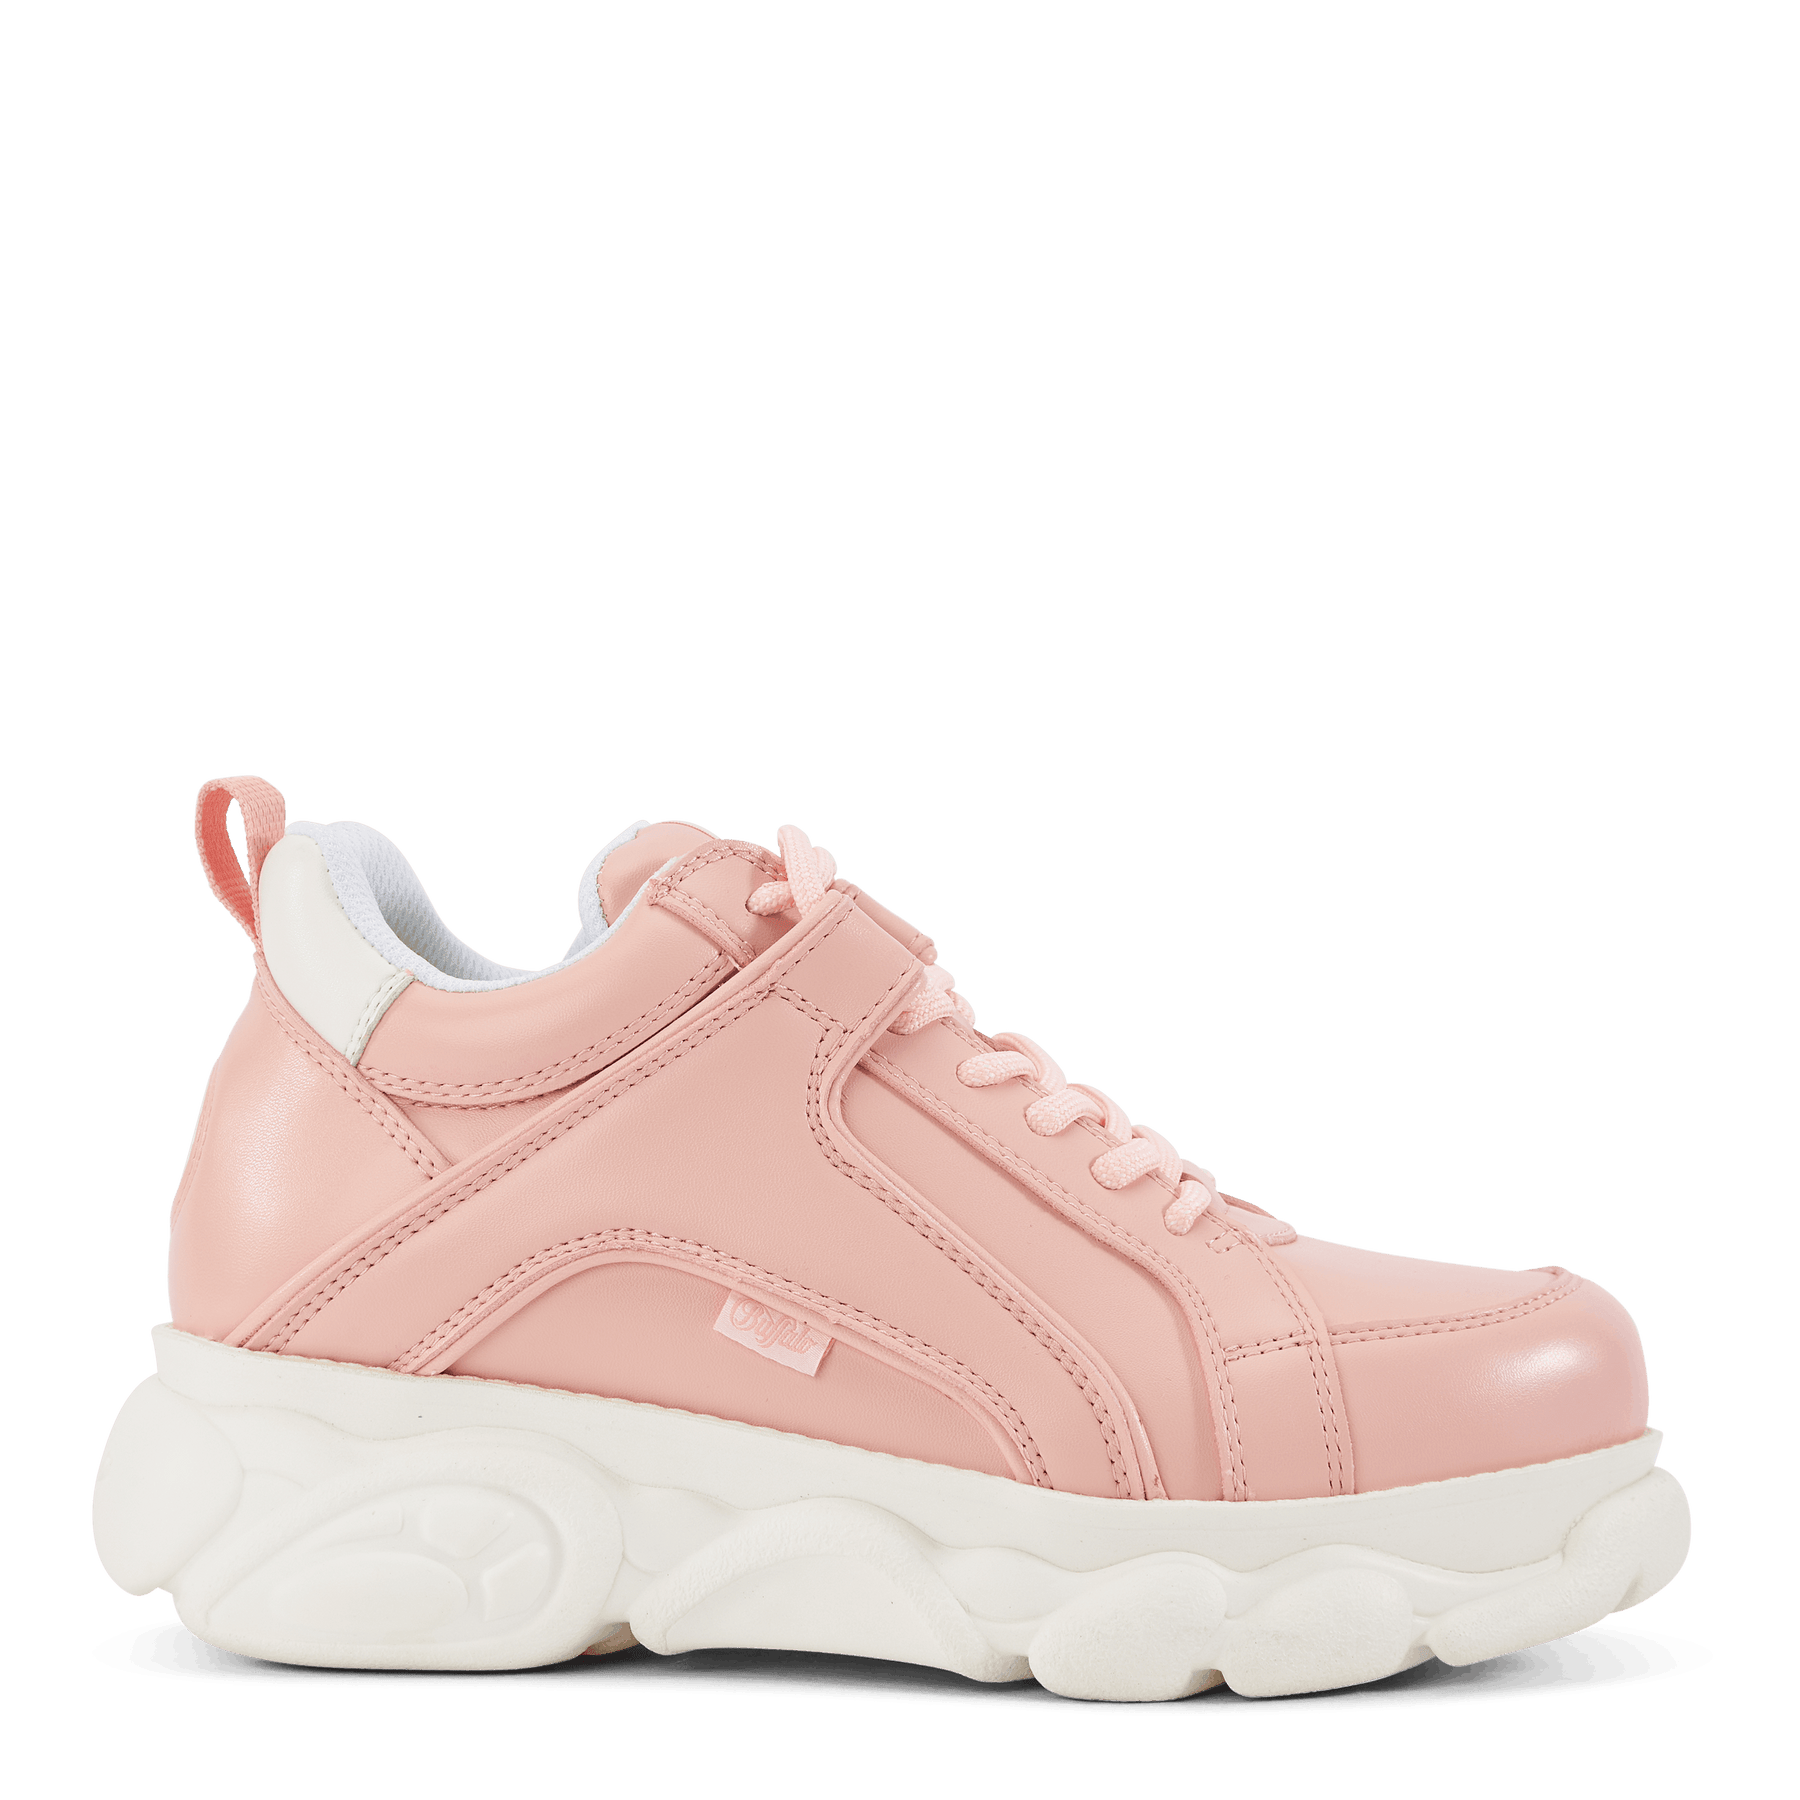 NWOB-BUFFALO LONDON PINK CHUNKY SNEAKERS | Chunky sneakers, Sneakers, Shoes